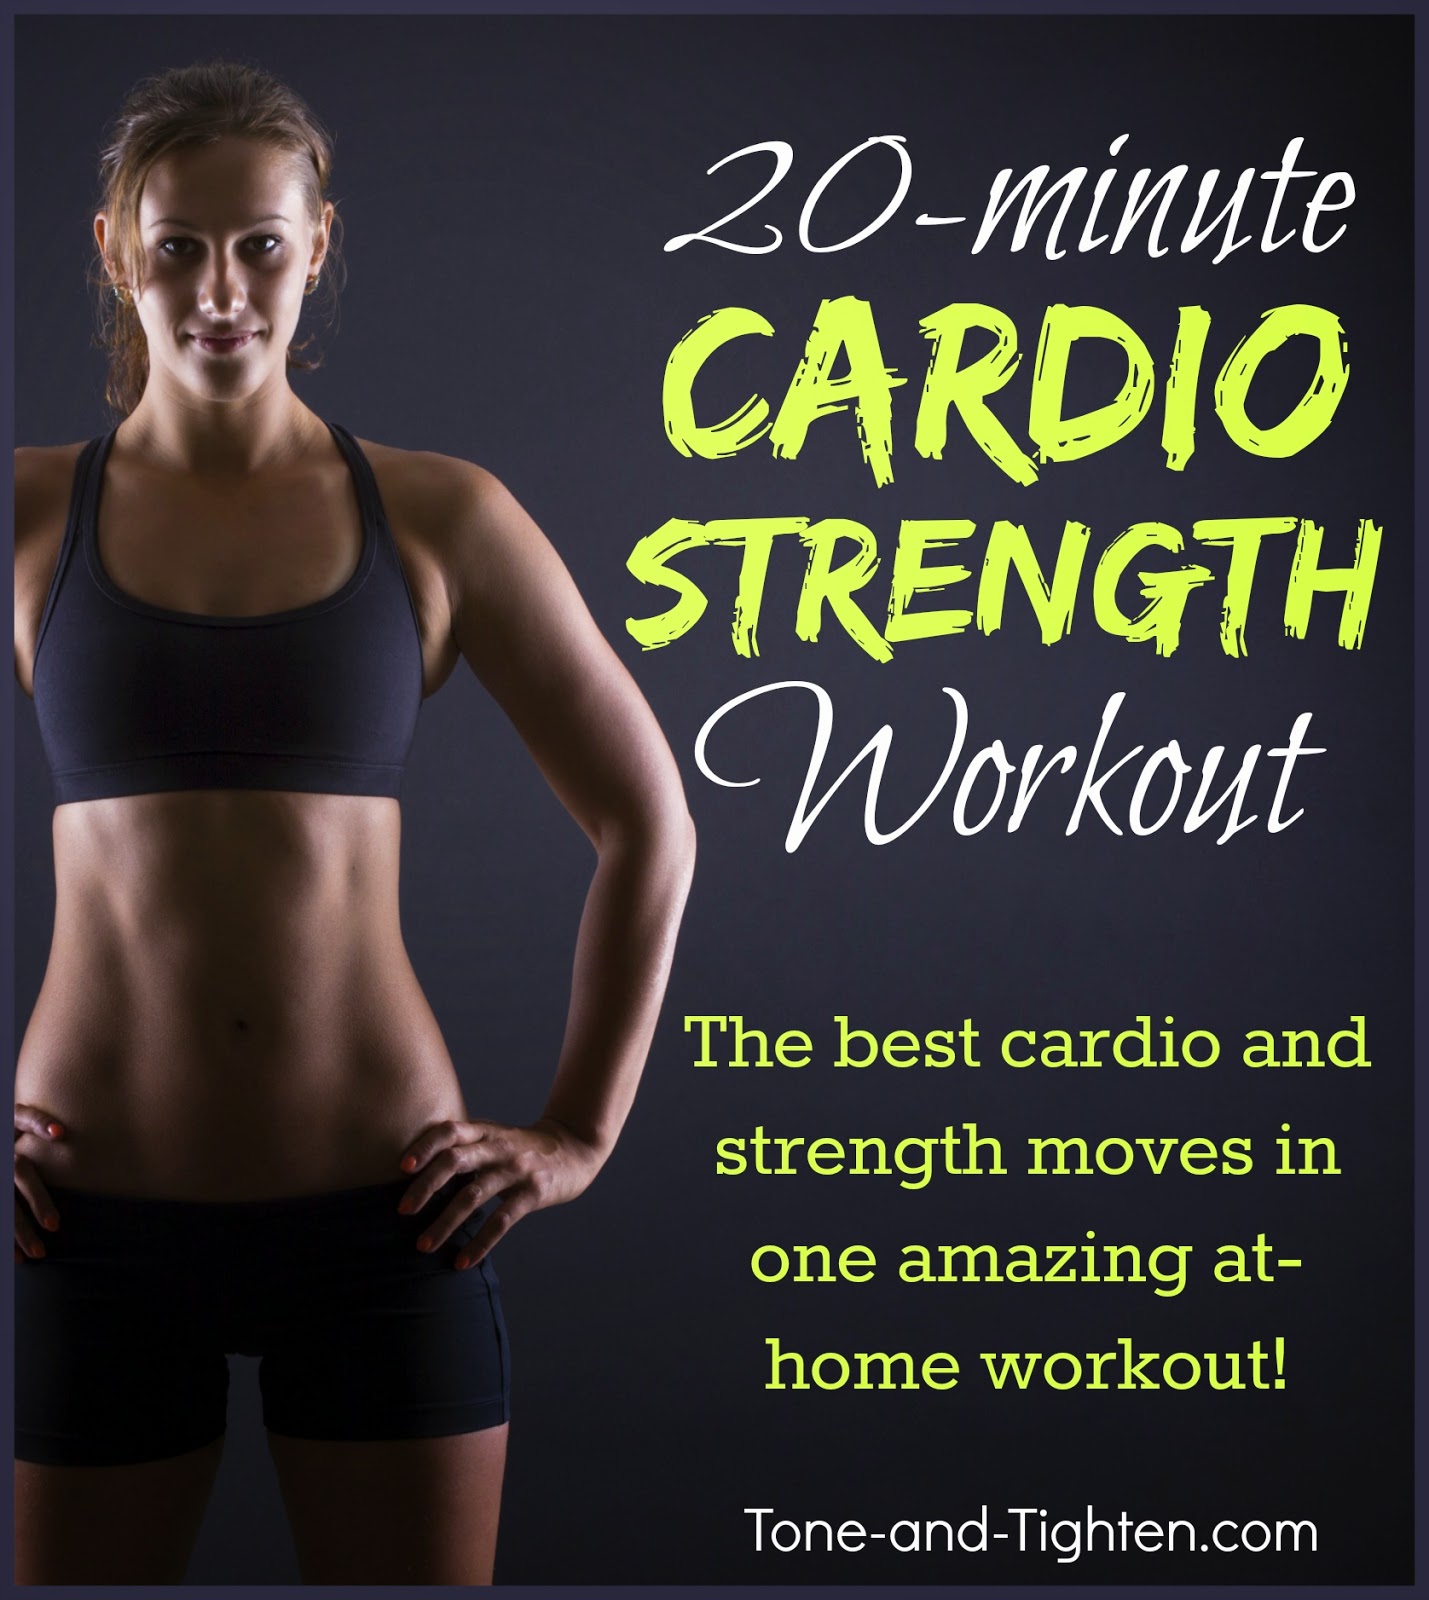 20-Minute At-Home Cardio Strength Workout – My favorite strength moves in cardio mode!